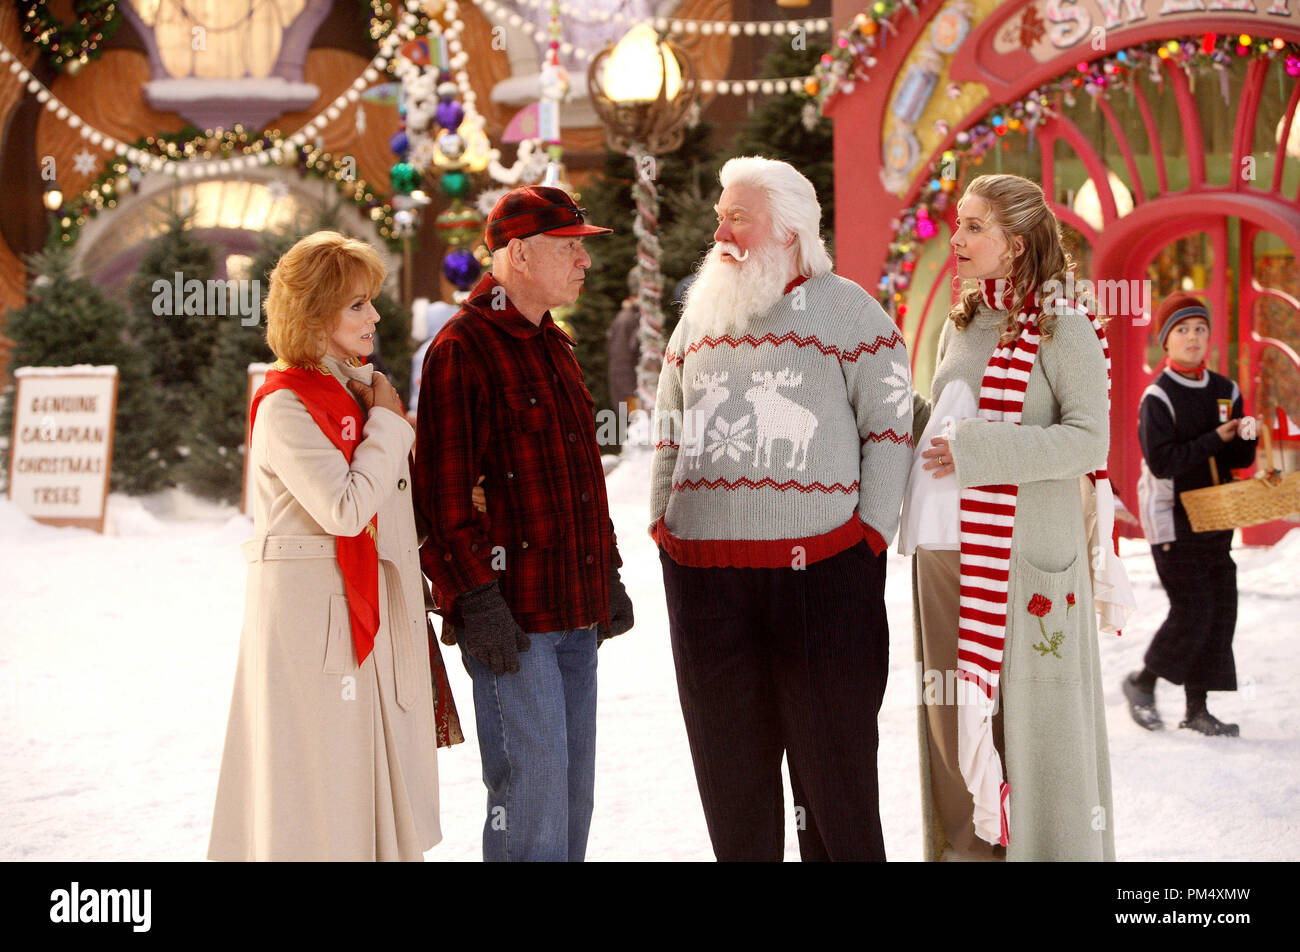 Studio Publicity Still from 'The Santa Clause 3: The Escape Clause' Ann-Margret, Alan Arkin, Tim Allen, Elizabeth Mitchell © 2006 Disney Enterprises, Inc. Photo credit: Joseph Lederer   File Reference # 307372595THA  For Editorial Use Only -  All Rights Reserved Stock Photo